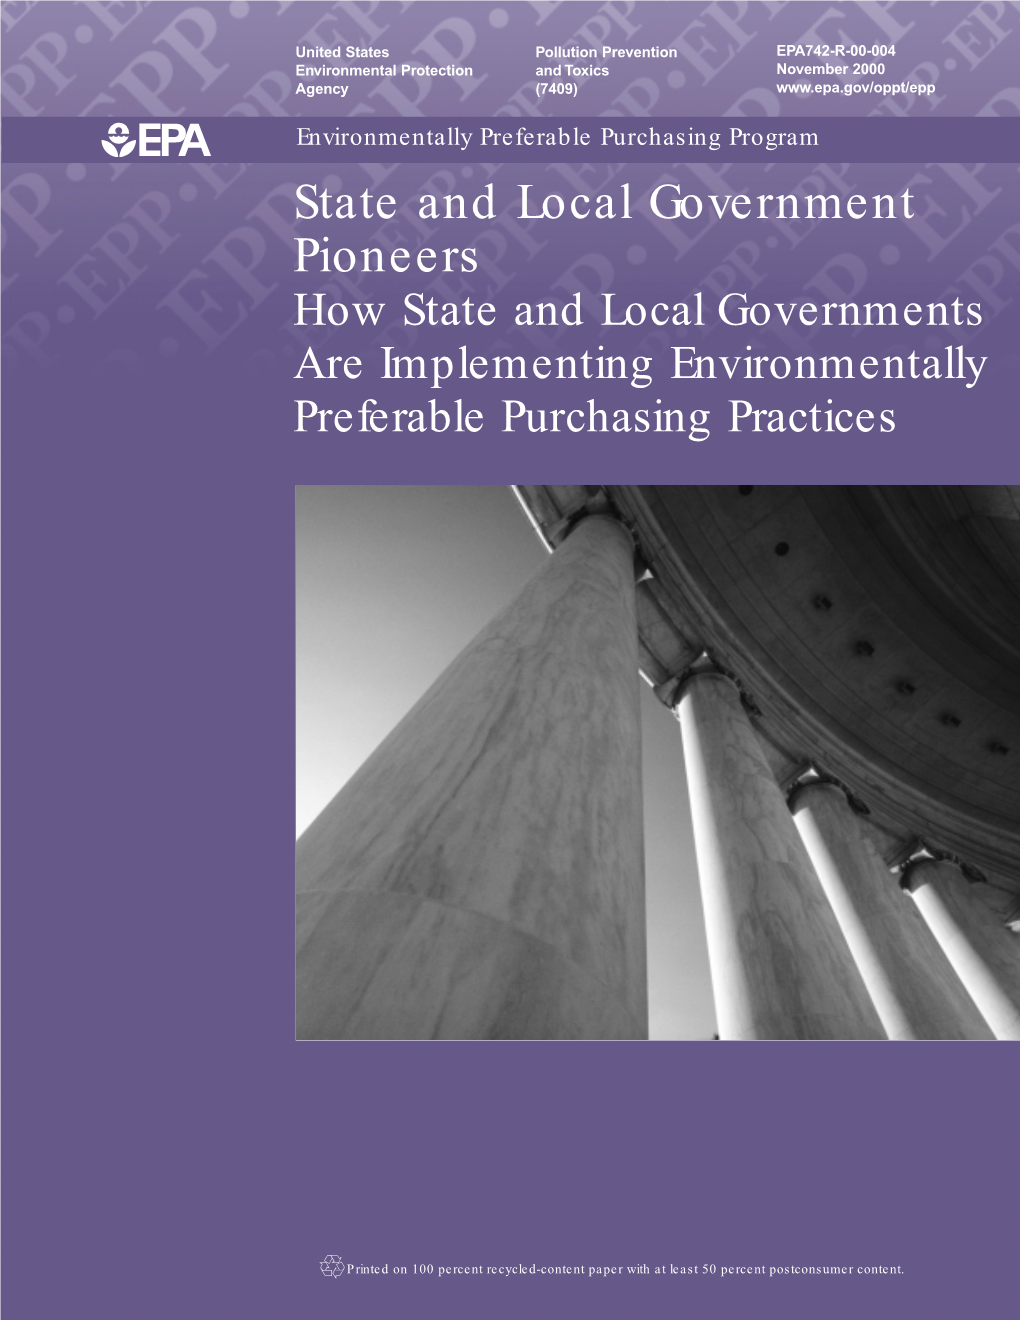 How State and Local Governments Are Implementing Environmentally Preferable Purchasing Practices